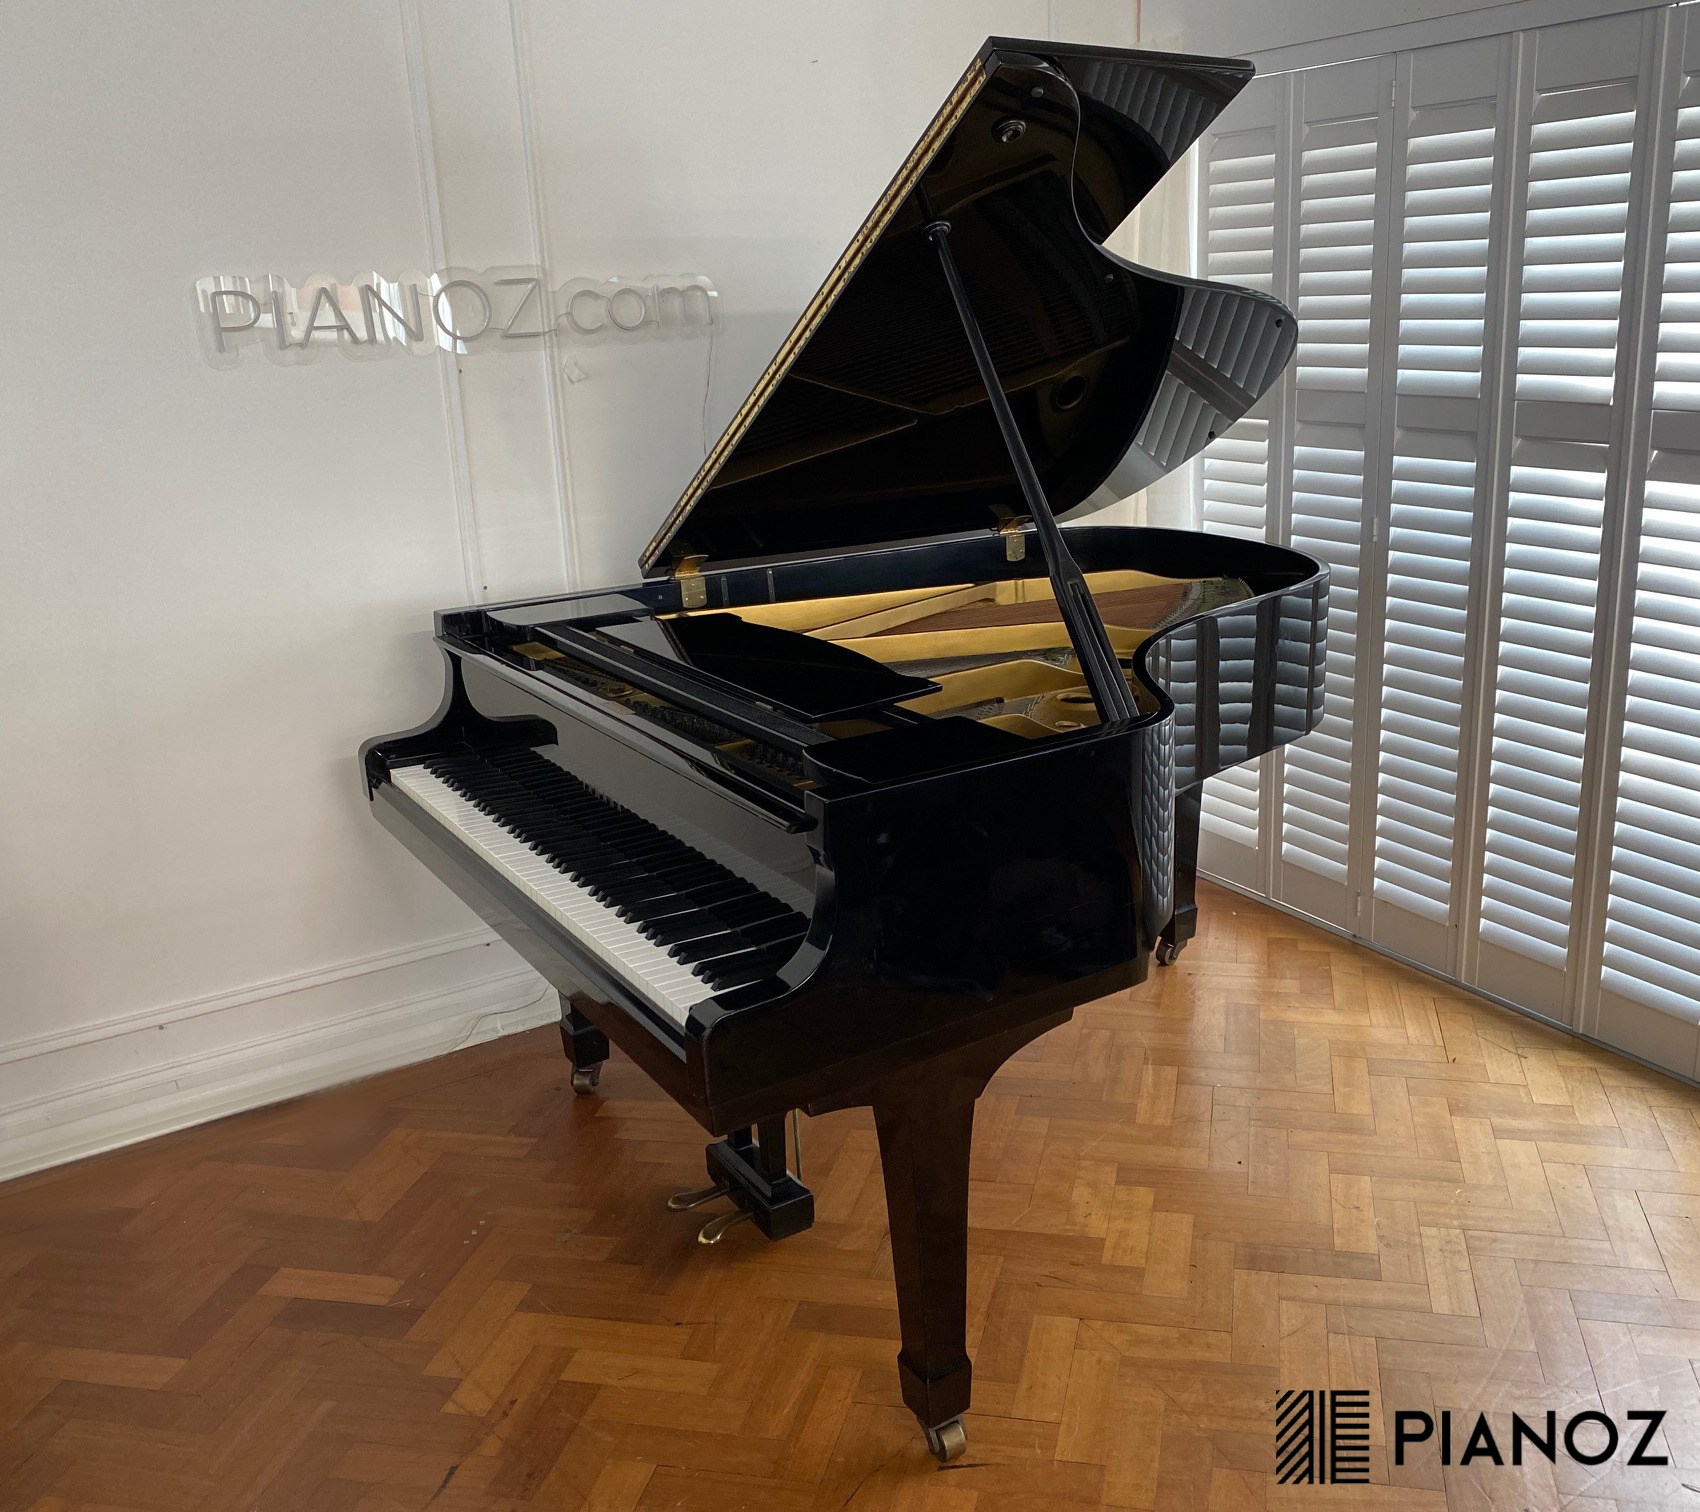 Yamaha G3 Japanese Grand Piano piano for sale in UK